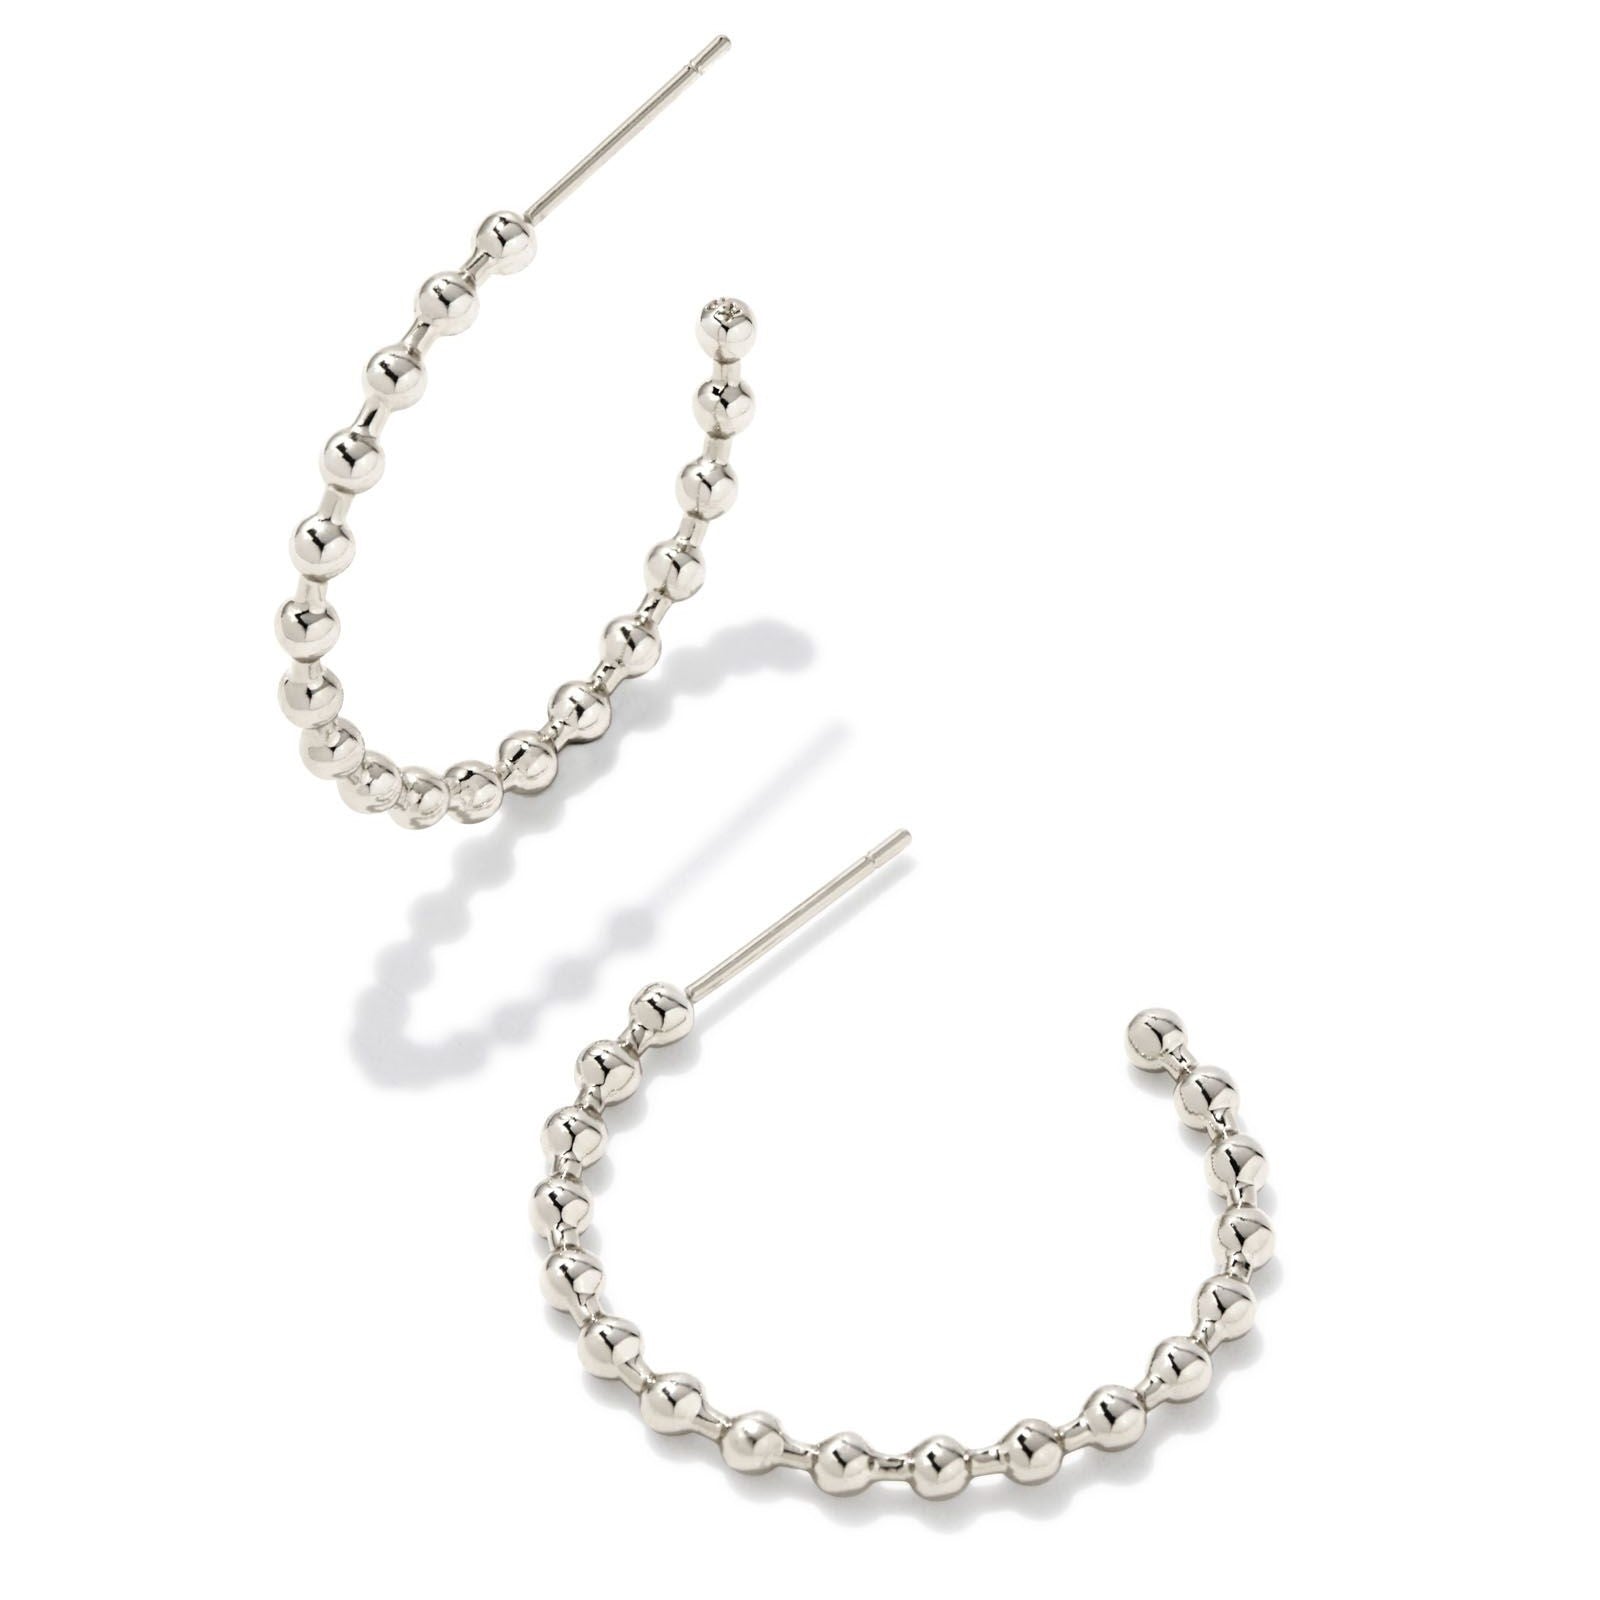 Kendra Scott | Oliver Silver Hoop Earrings - Giddy Up Glamour Boutique